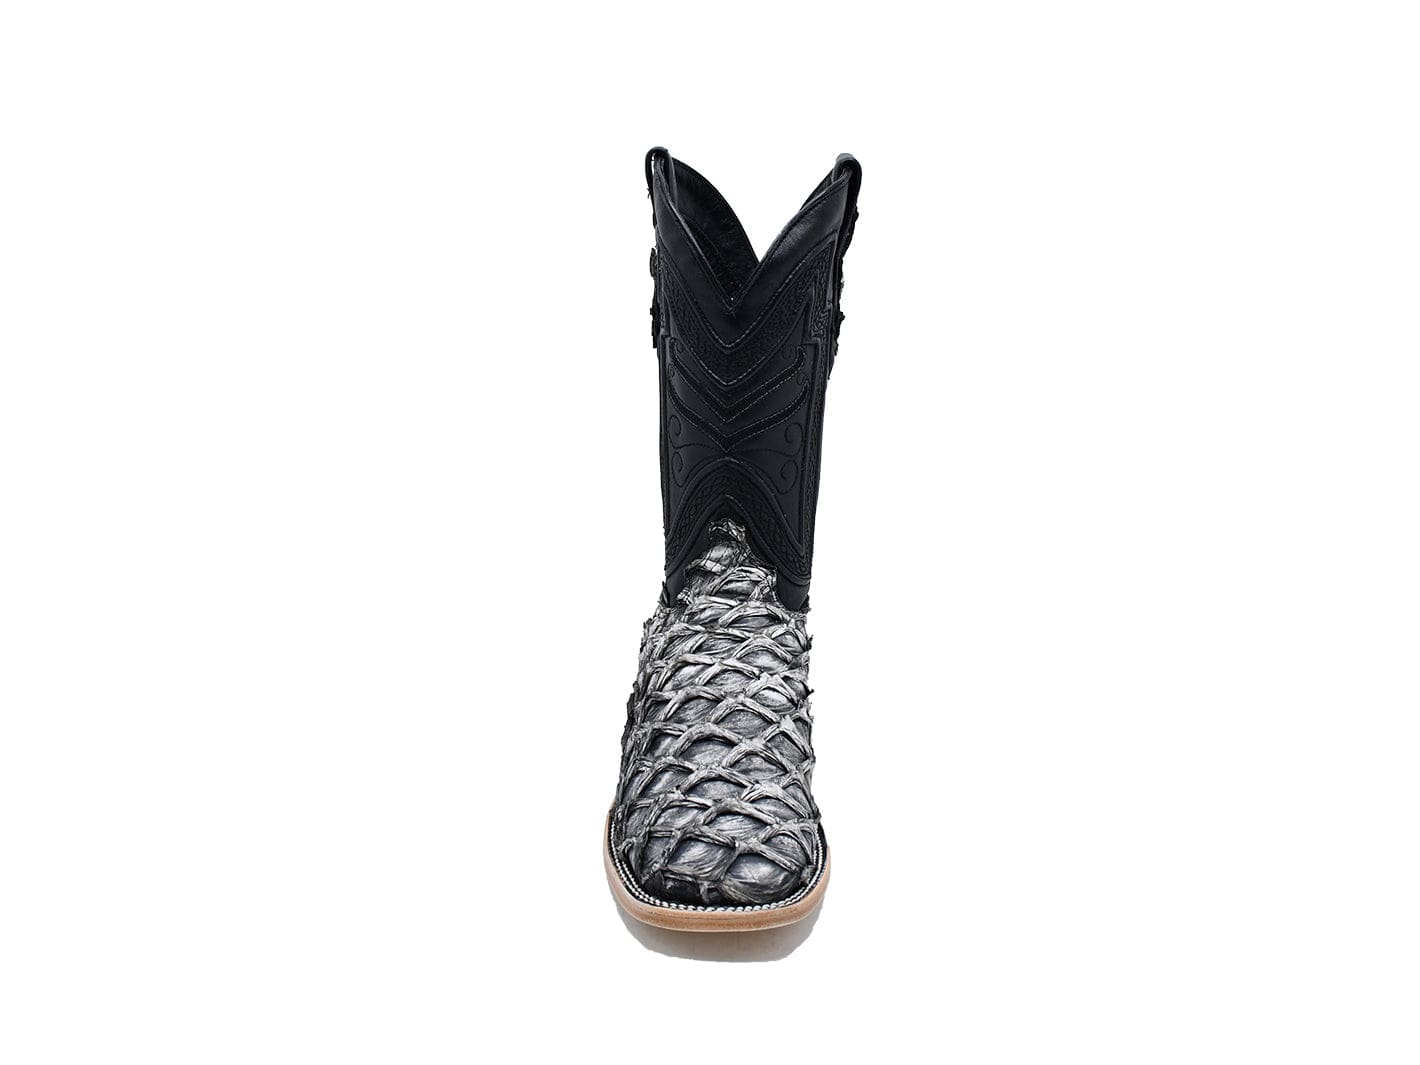 Texas Country Exotic Boot Pez Hueso Rustico PZ60